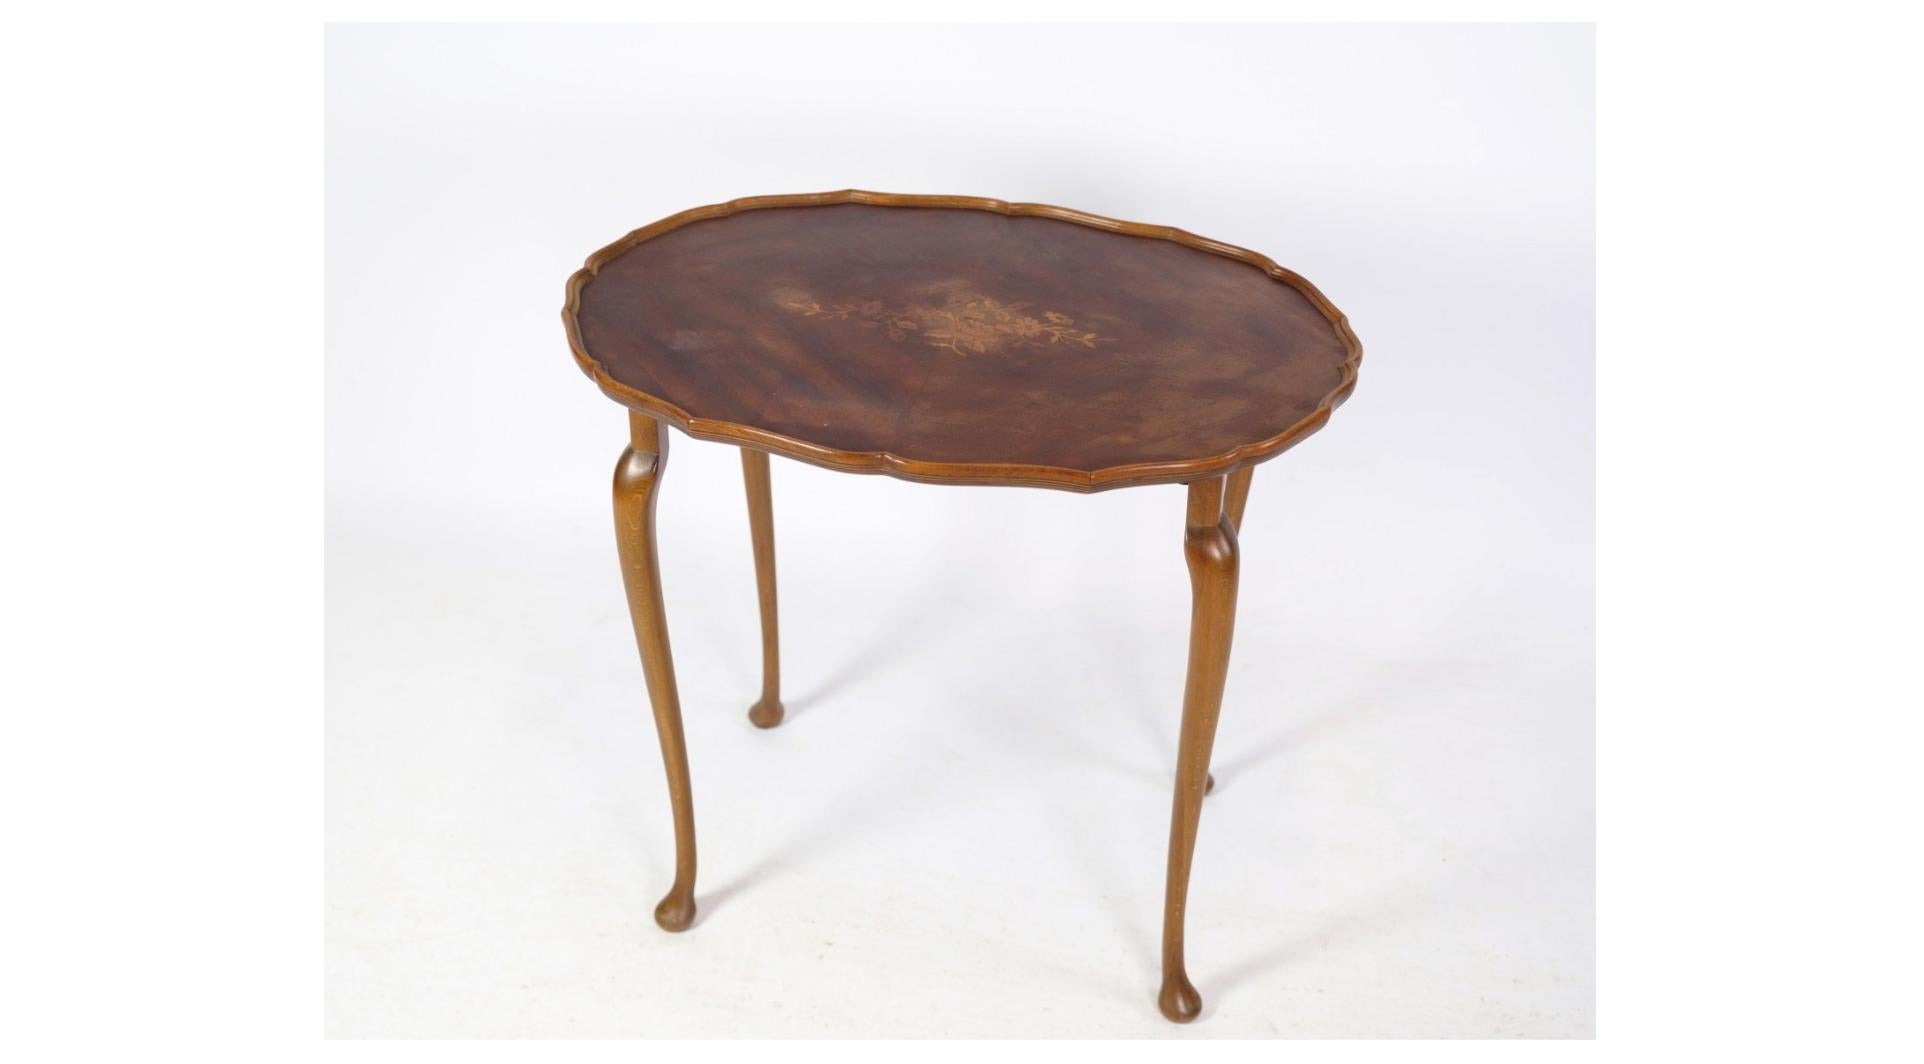 A captivating set of three insert tables adorned with neo-Rococo-style marquetry, dating back to the 1960s. These exquisite tables showcase the intricate craftsmanship and ornate design elements characteristic of the neo-Rococo period, adding a